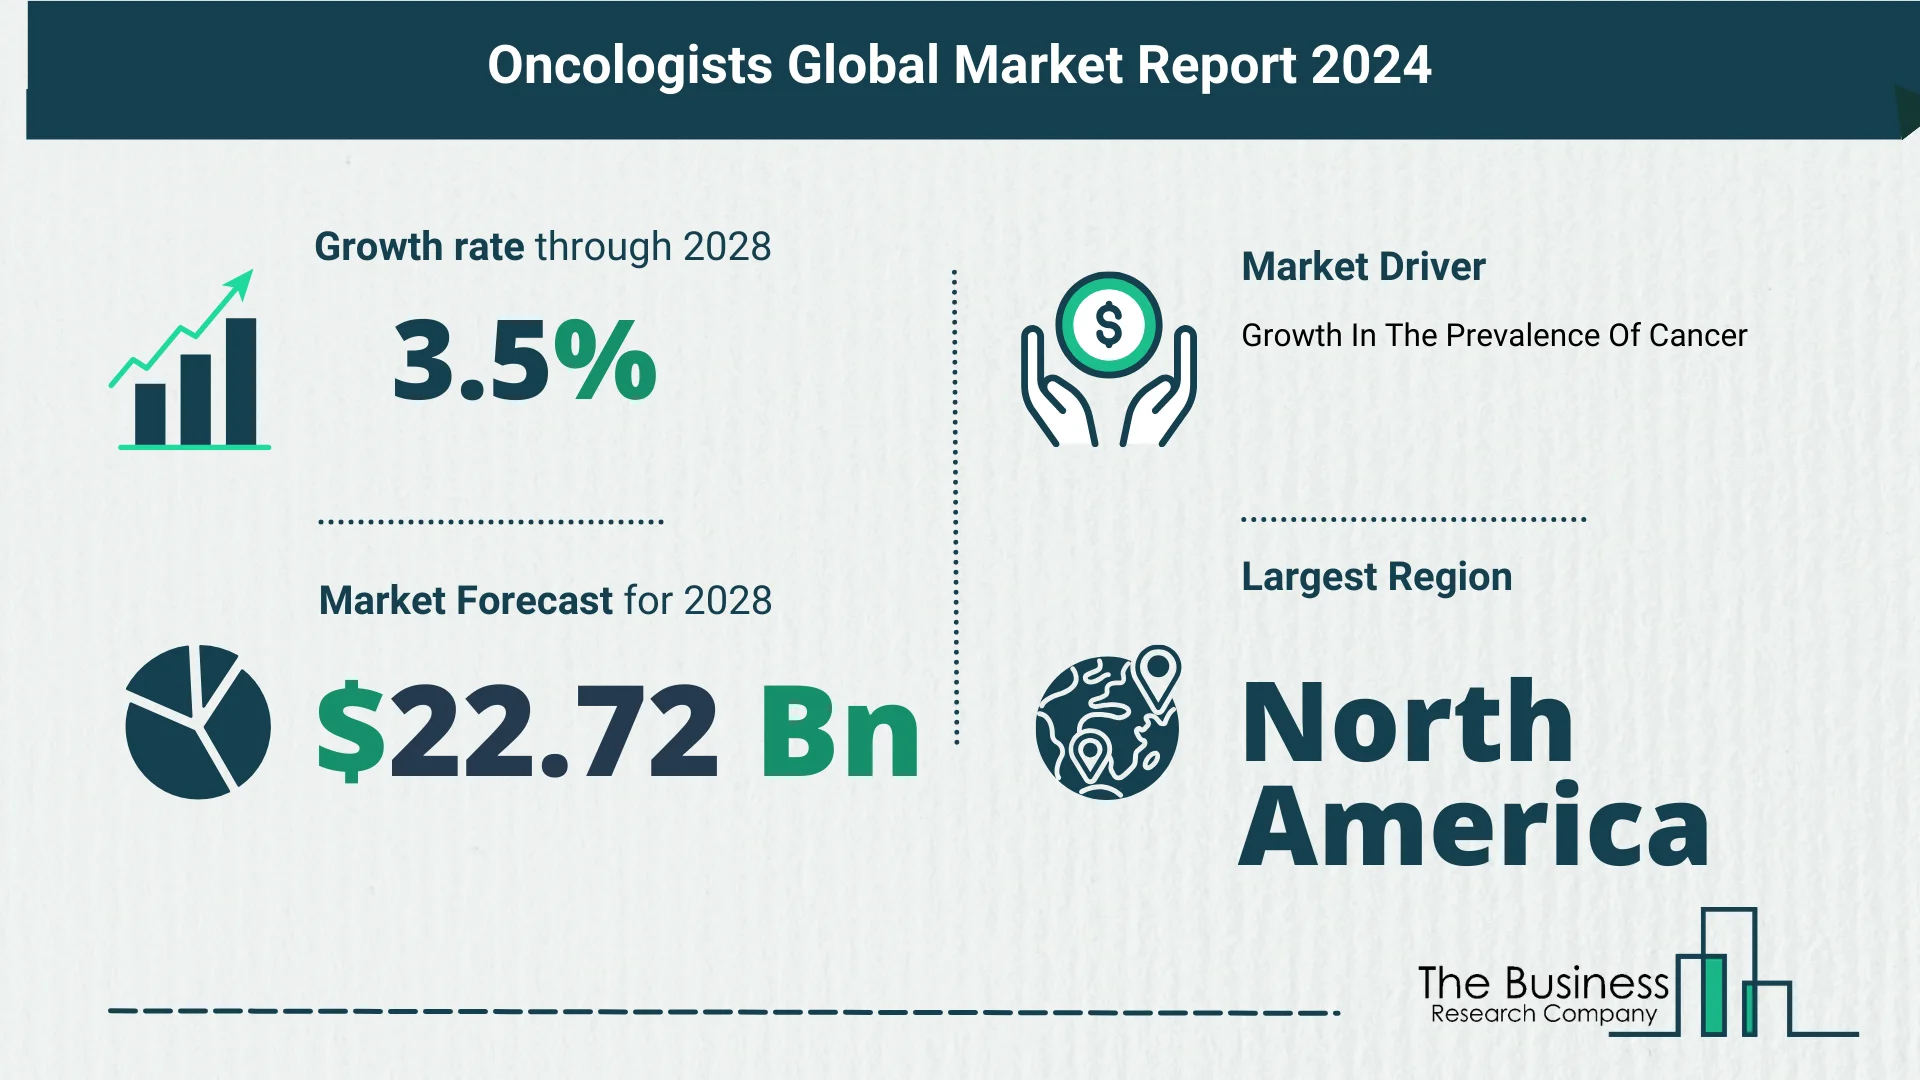 Global Oncologists Market Report